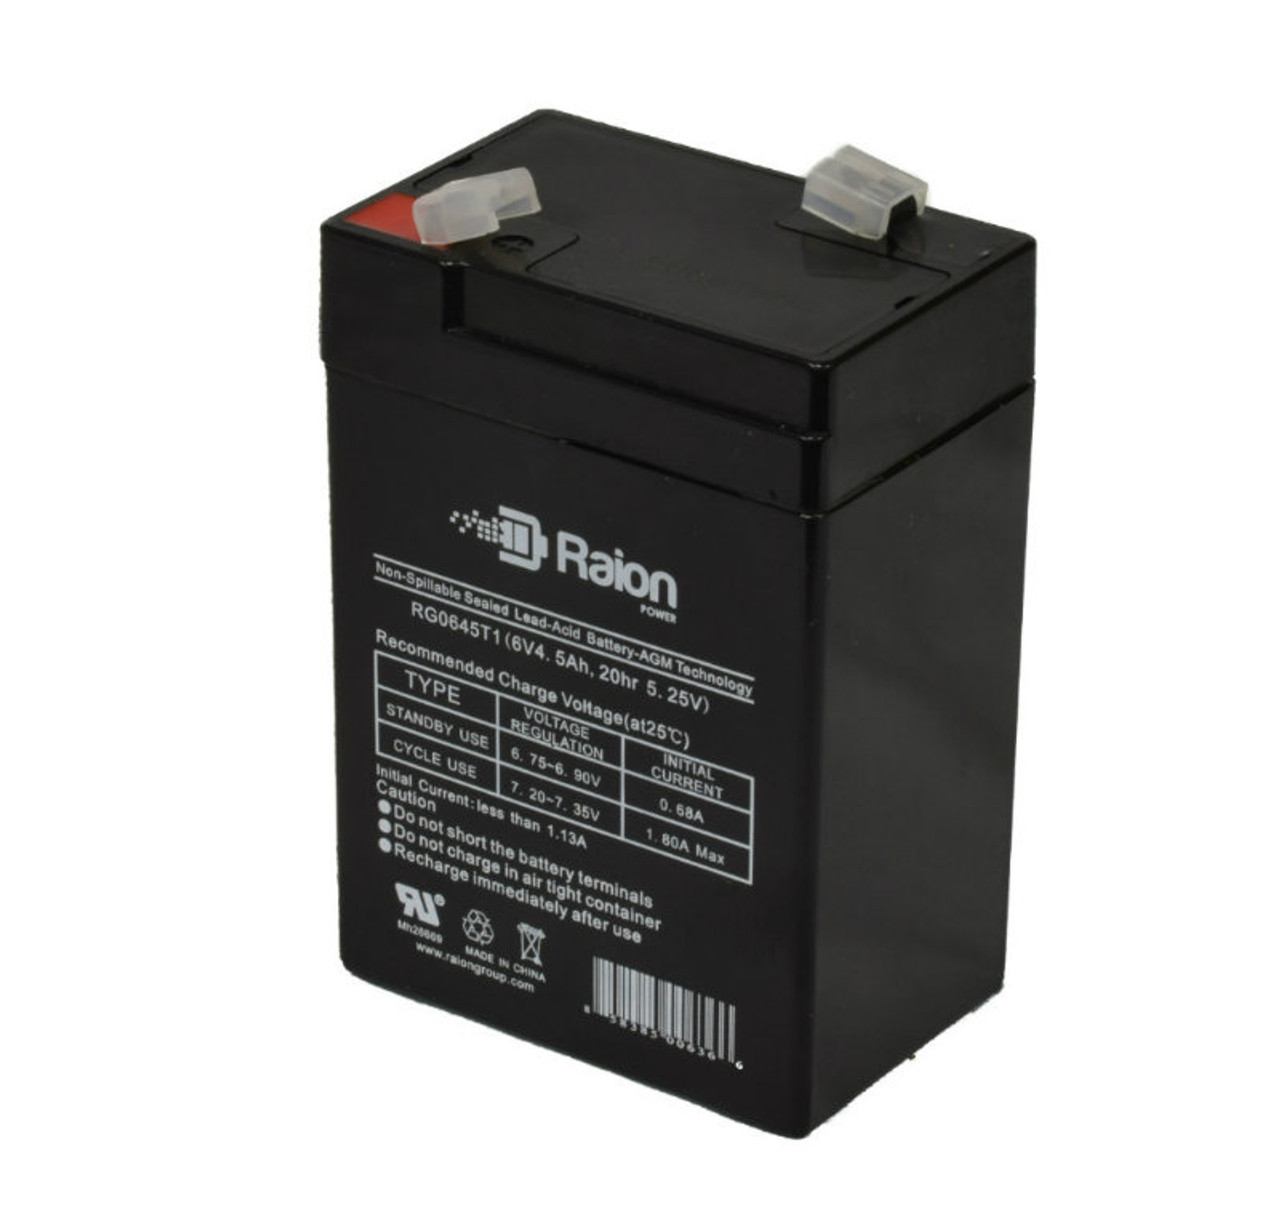 Raion Power RG0645T1 6V 4.5Ah Replacement Battery Cartridge for National Power Corporation GS012P3